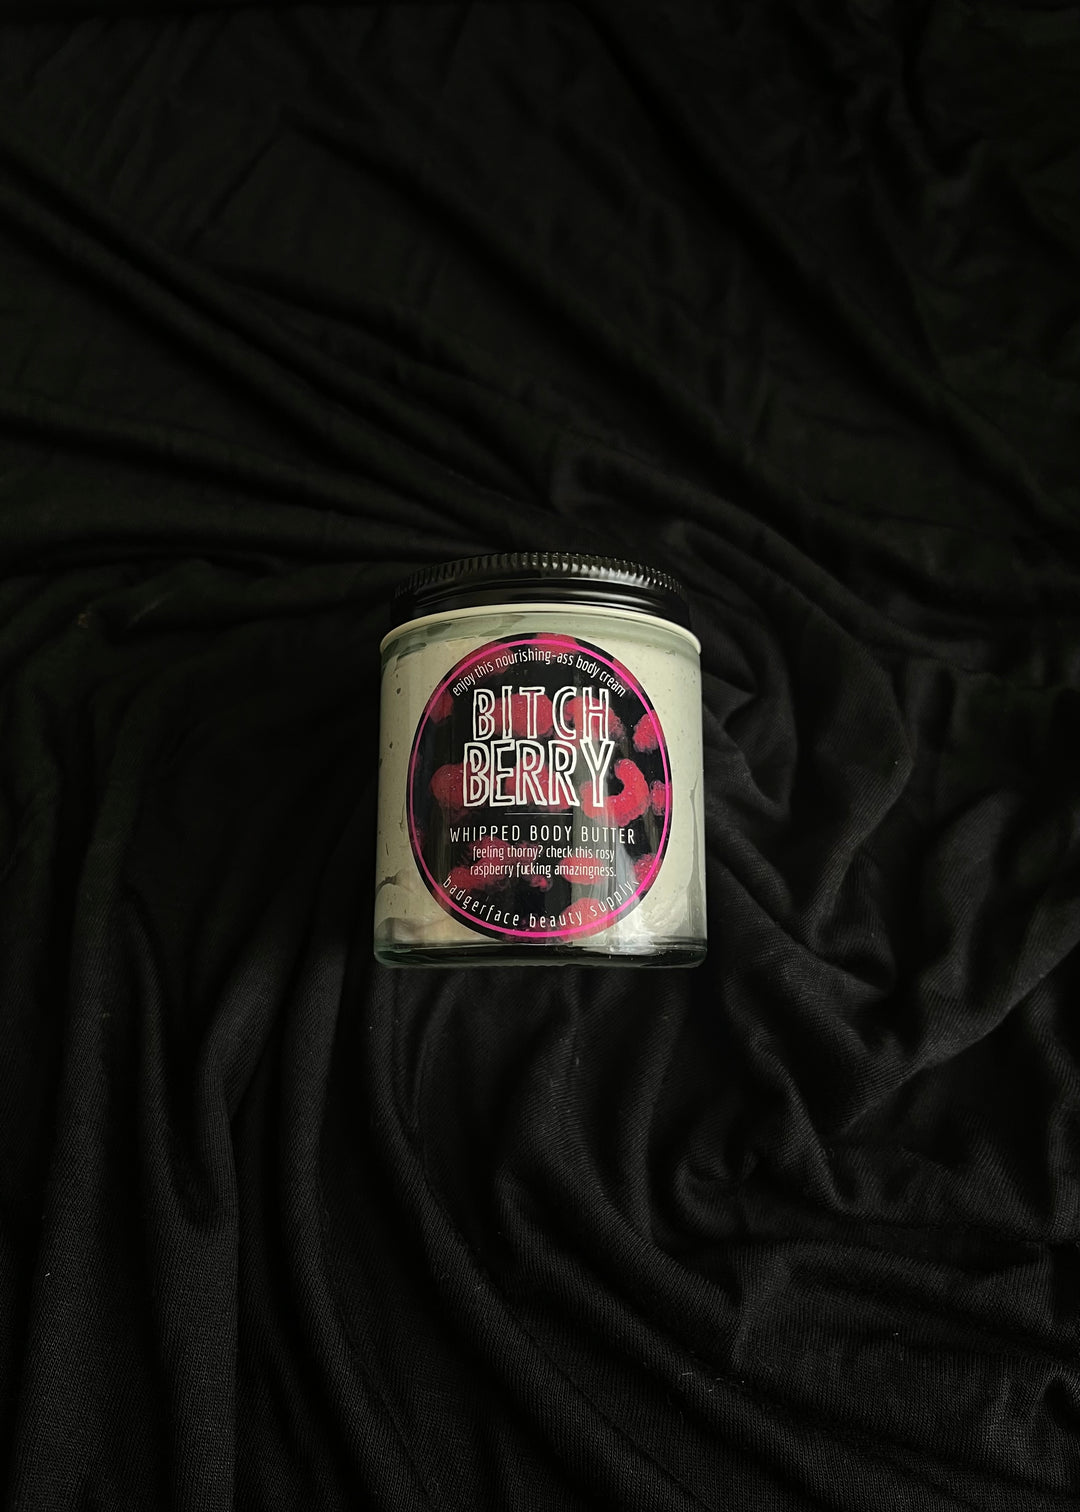 B***H BERRY WHIPPED BODY BUTTER